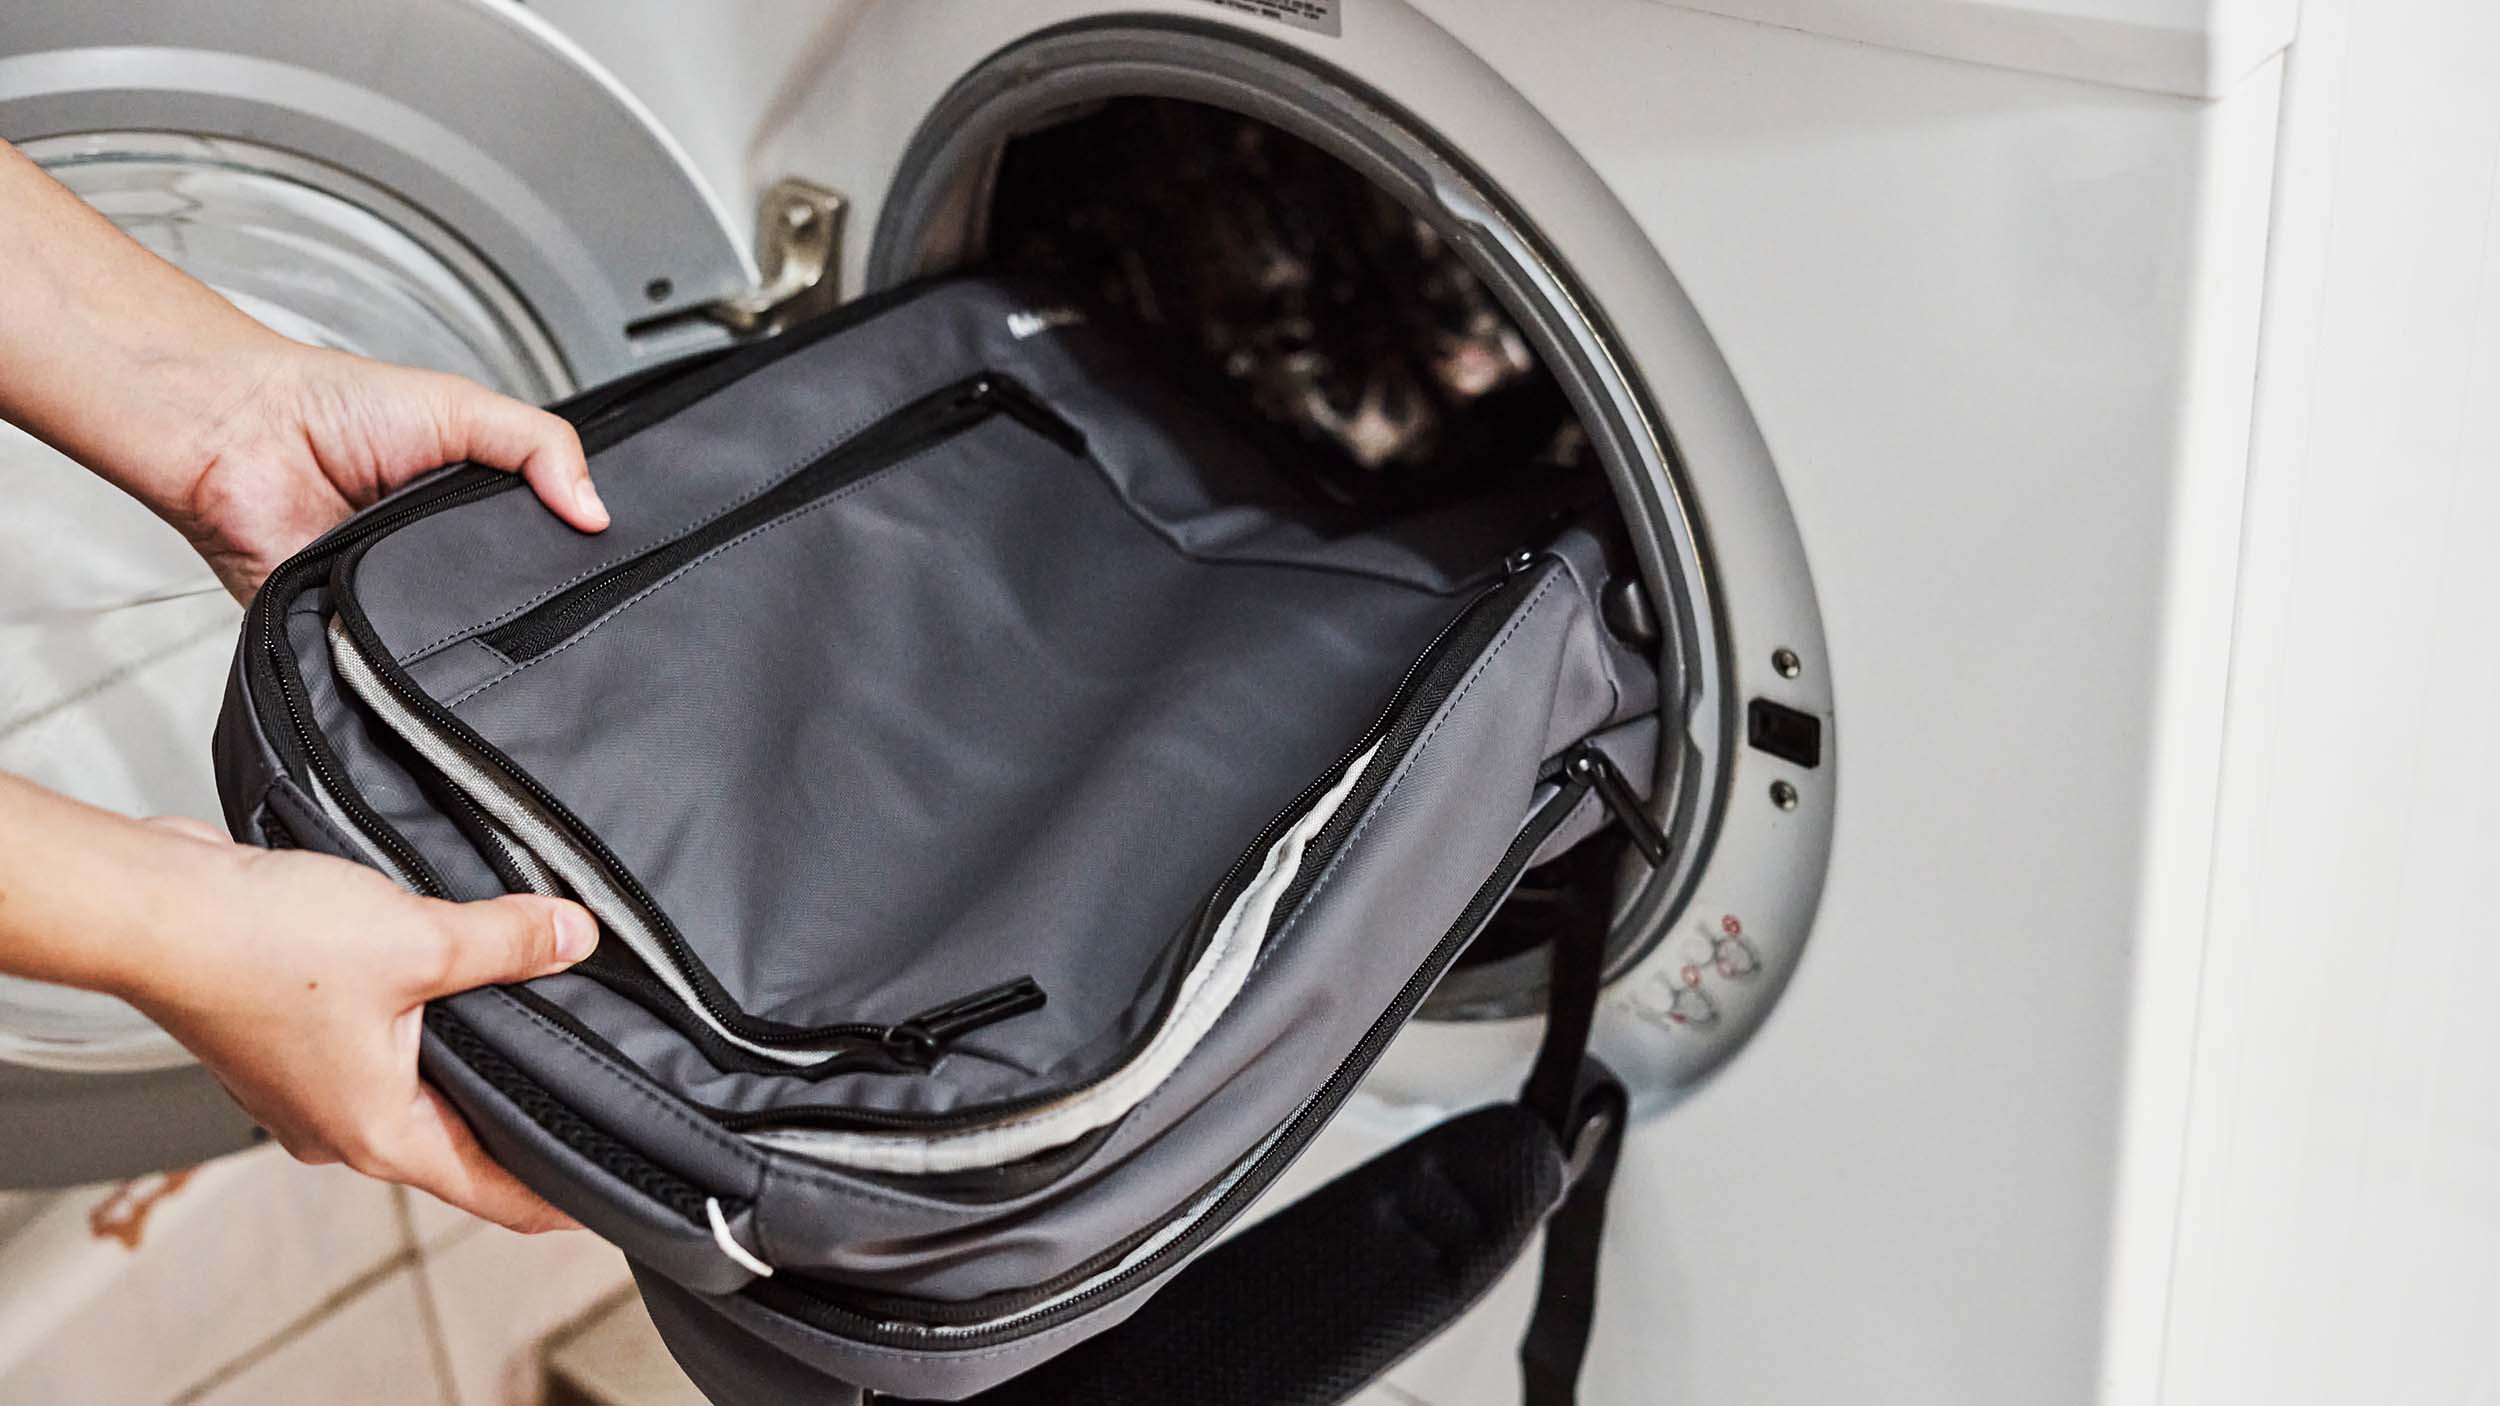 How to Clean a Backpack—With & Without a Washing Machine